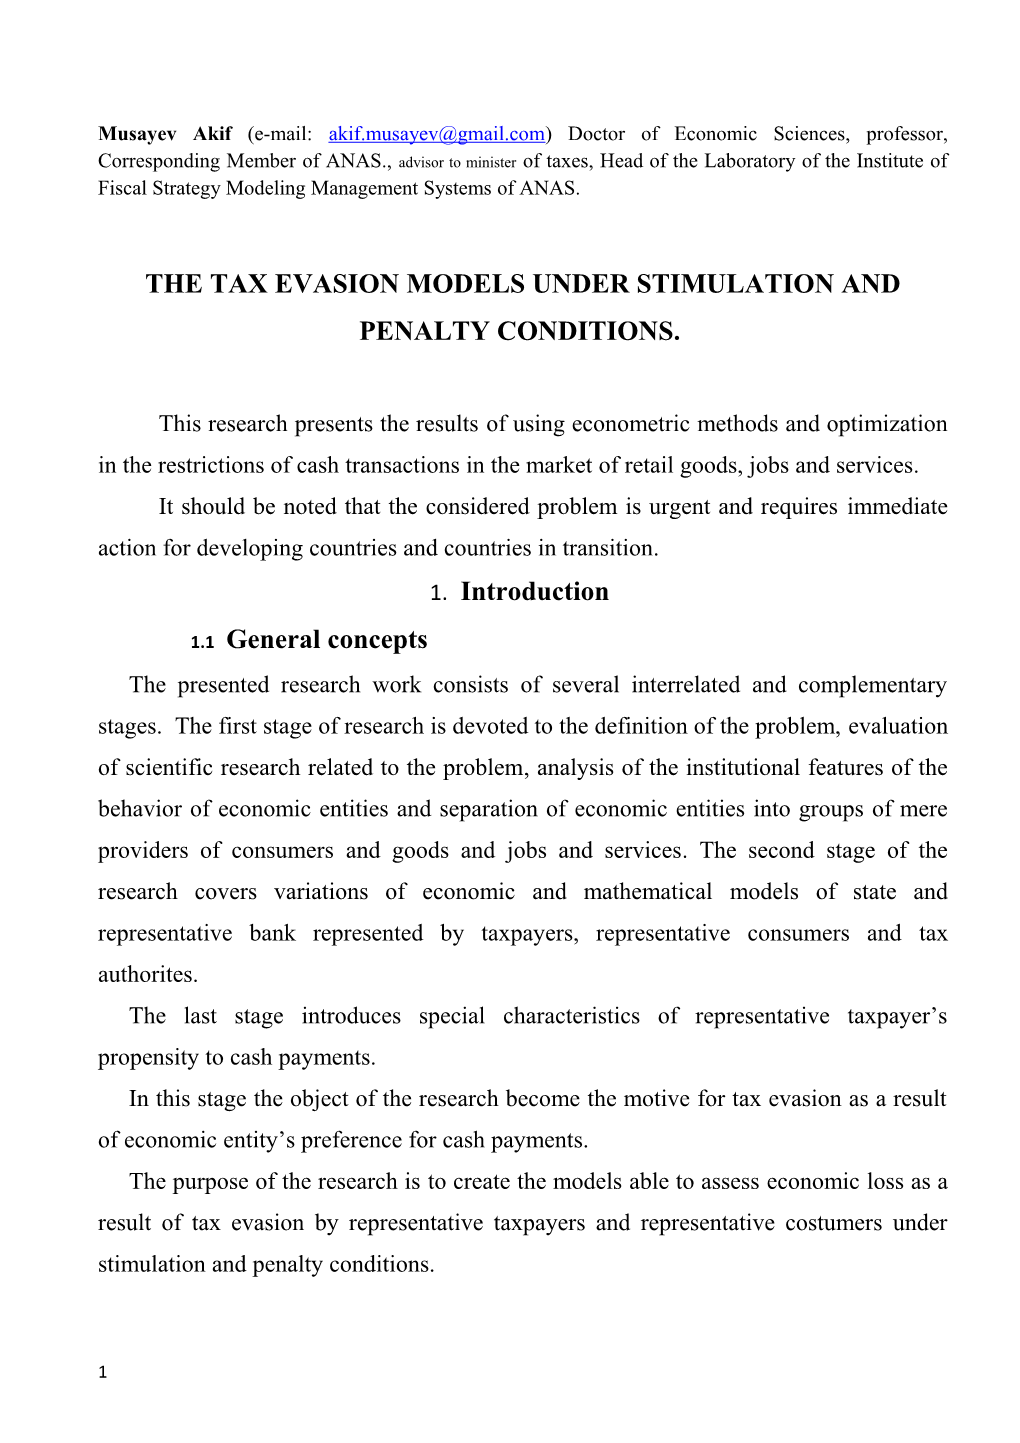 The Tax Evasion Models Under Stimulation and Penalty Conditions